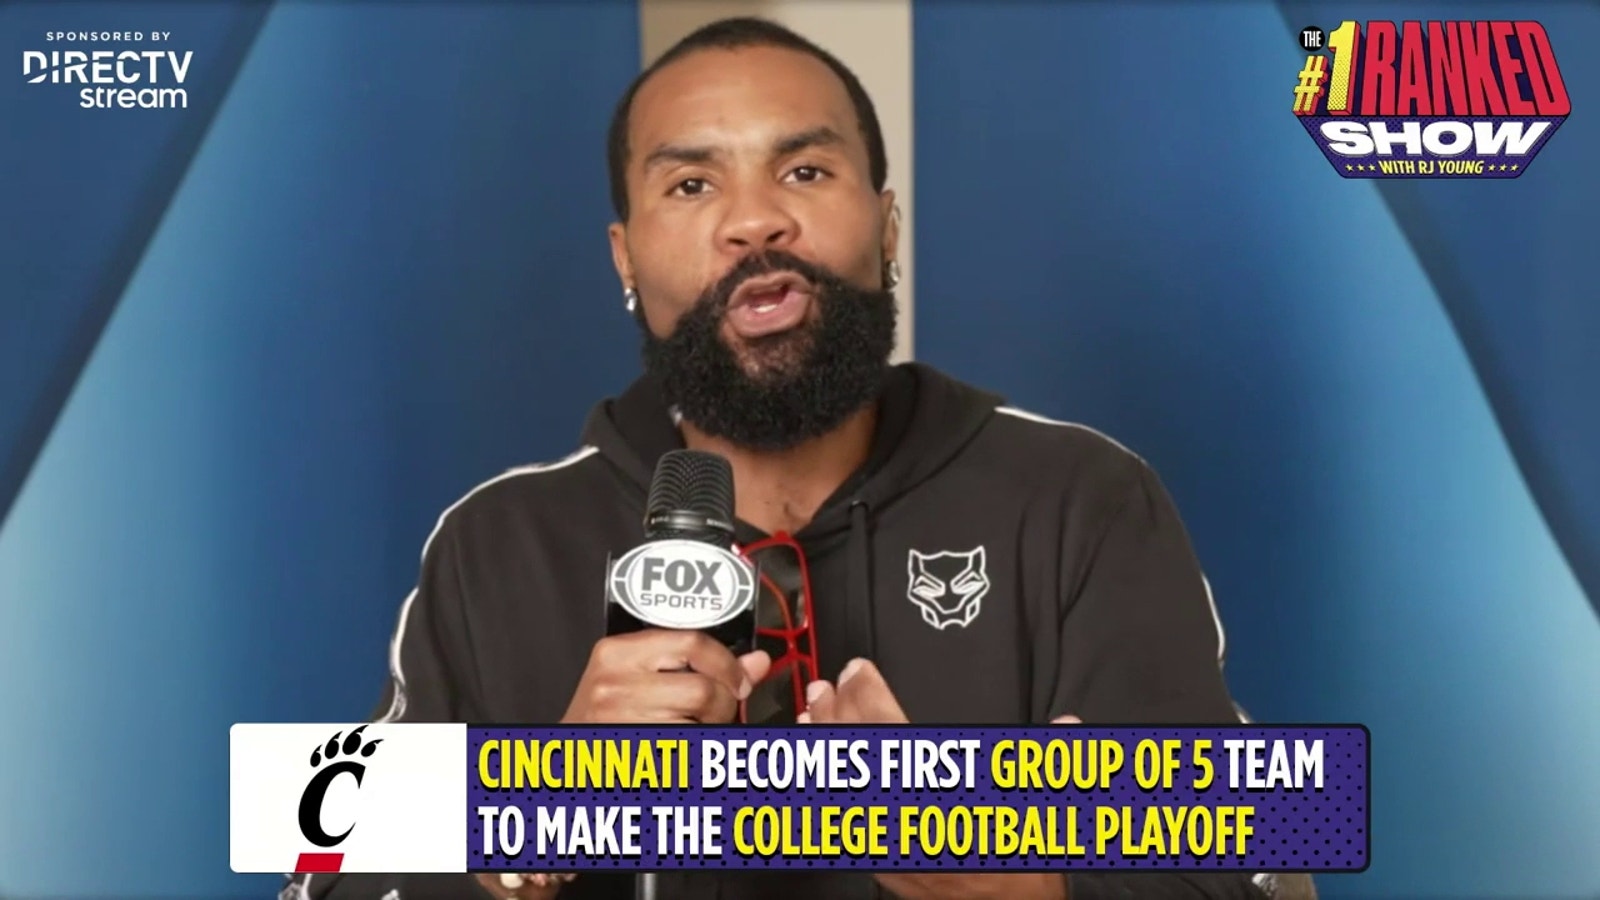 RJ Young breaks down how the Bearcats broke the CFP glass ceiling